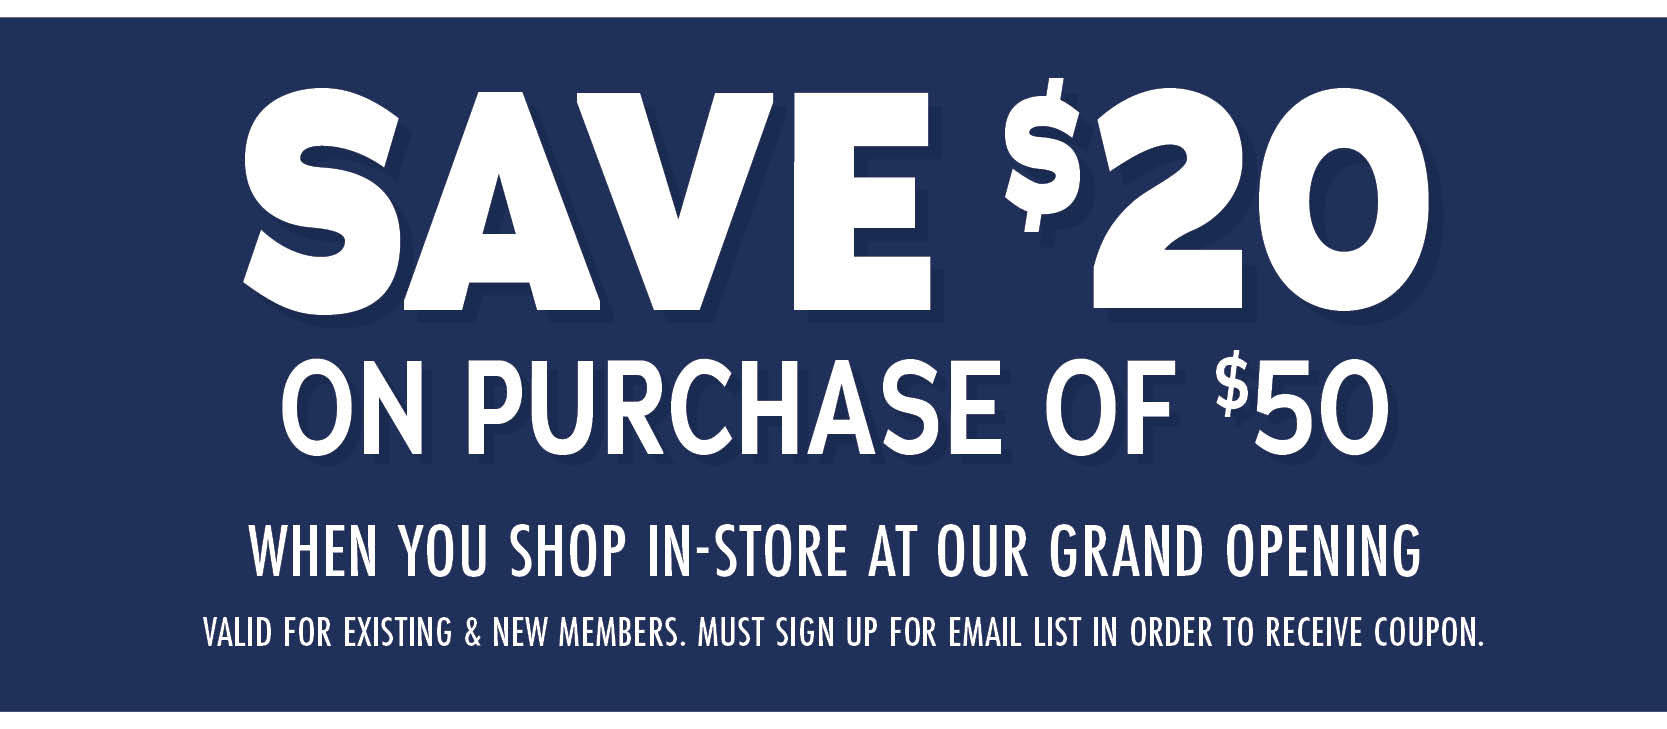 Save $20 on your purchase of $50 when you shop in-store at our grand opening. Valid for existing & new members. must sign up for email list in order to receive coupon.